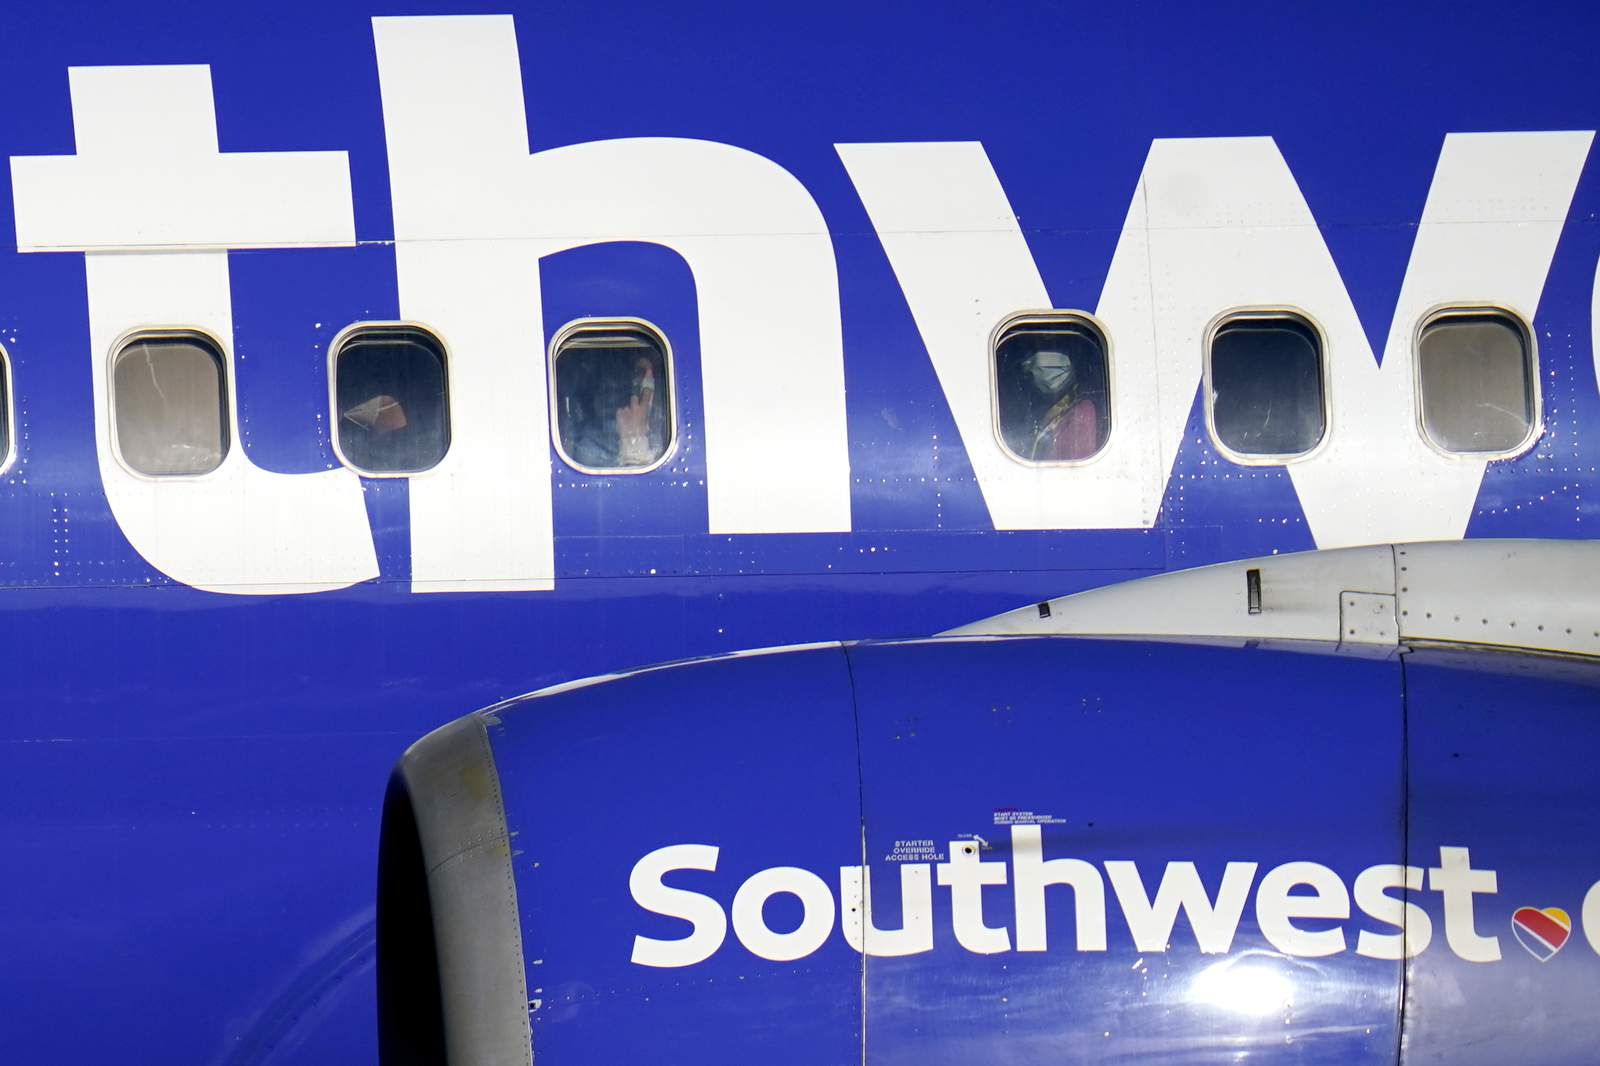 Southwest warns nearly 7,000 workers of possible furloughs